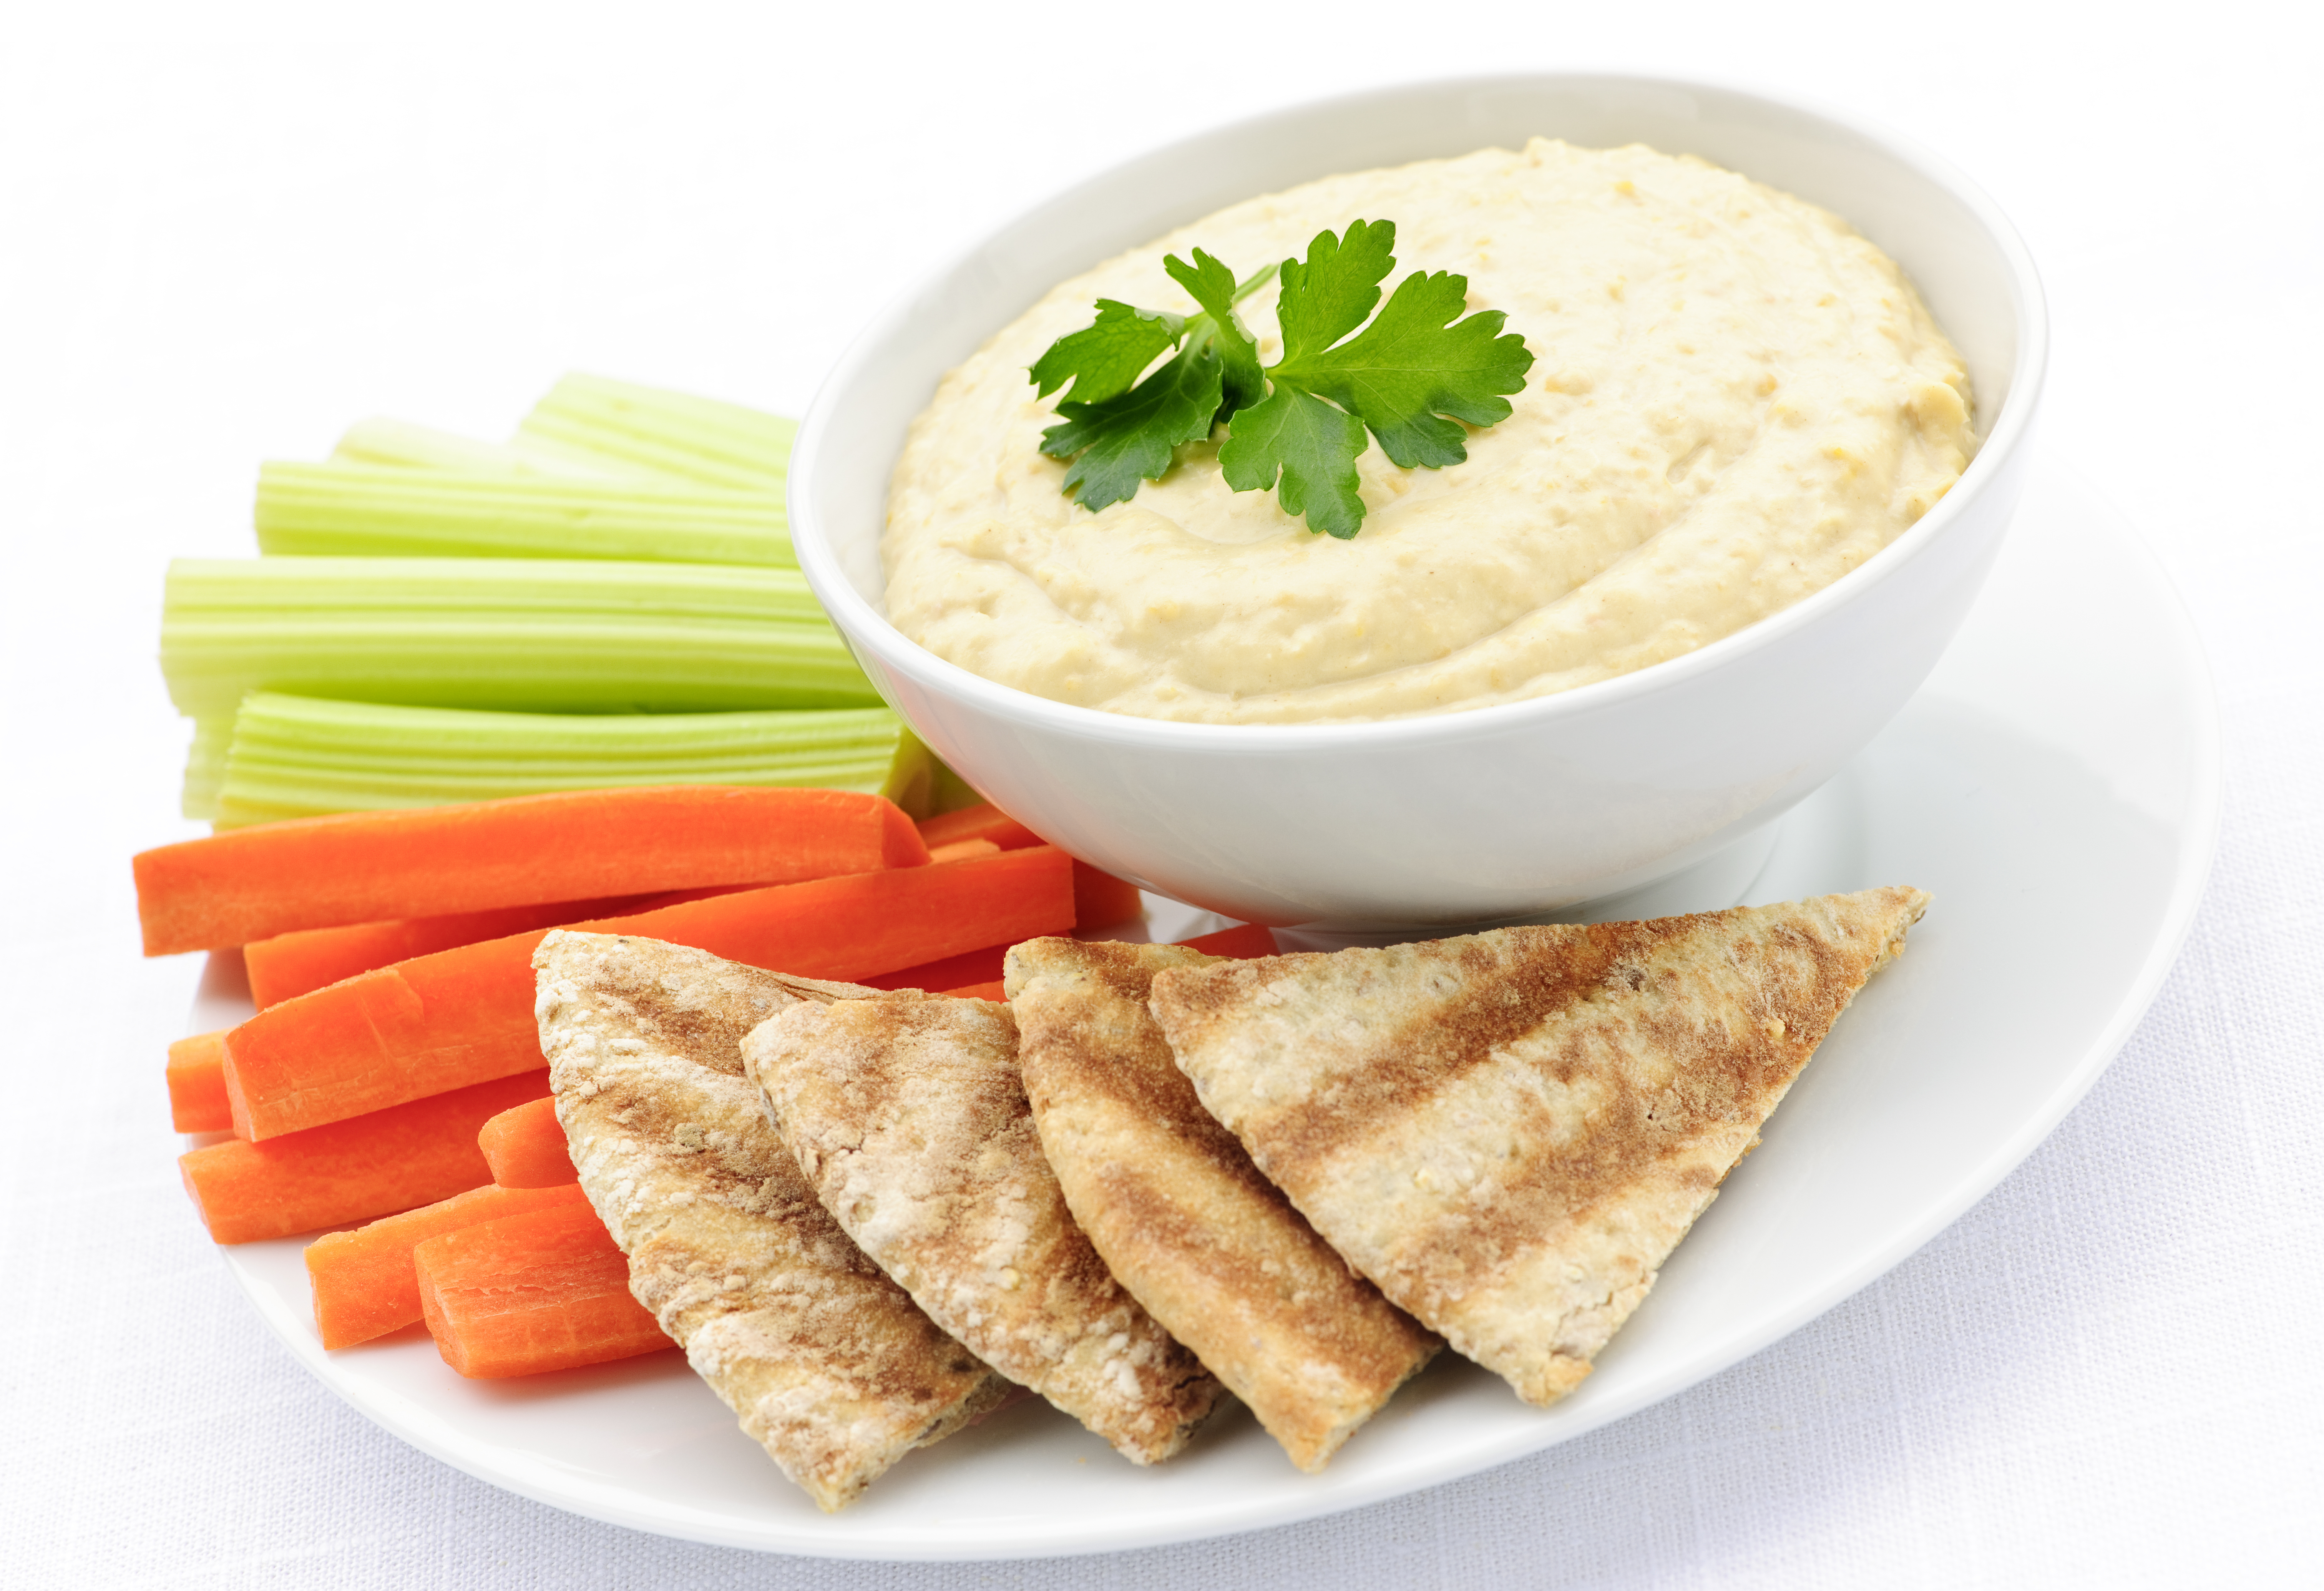 A bowl of hummus with a plate of celery sticks, carrot sticks, and pita bread.